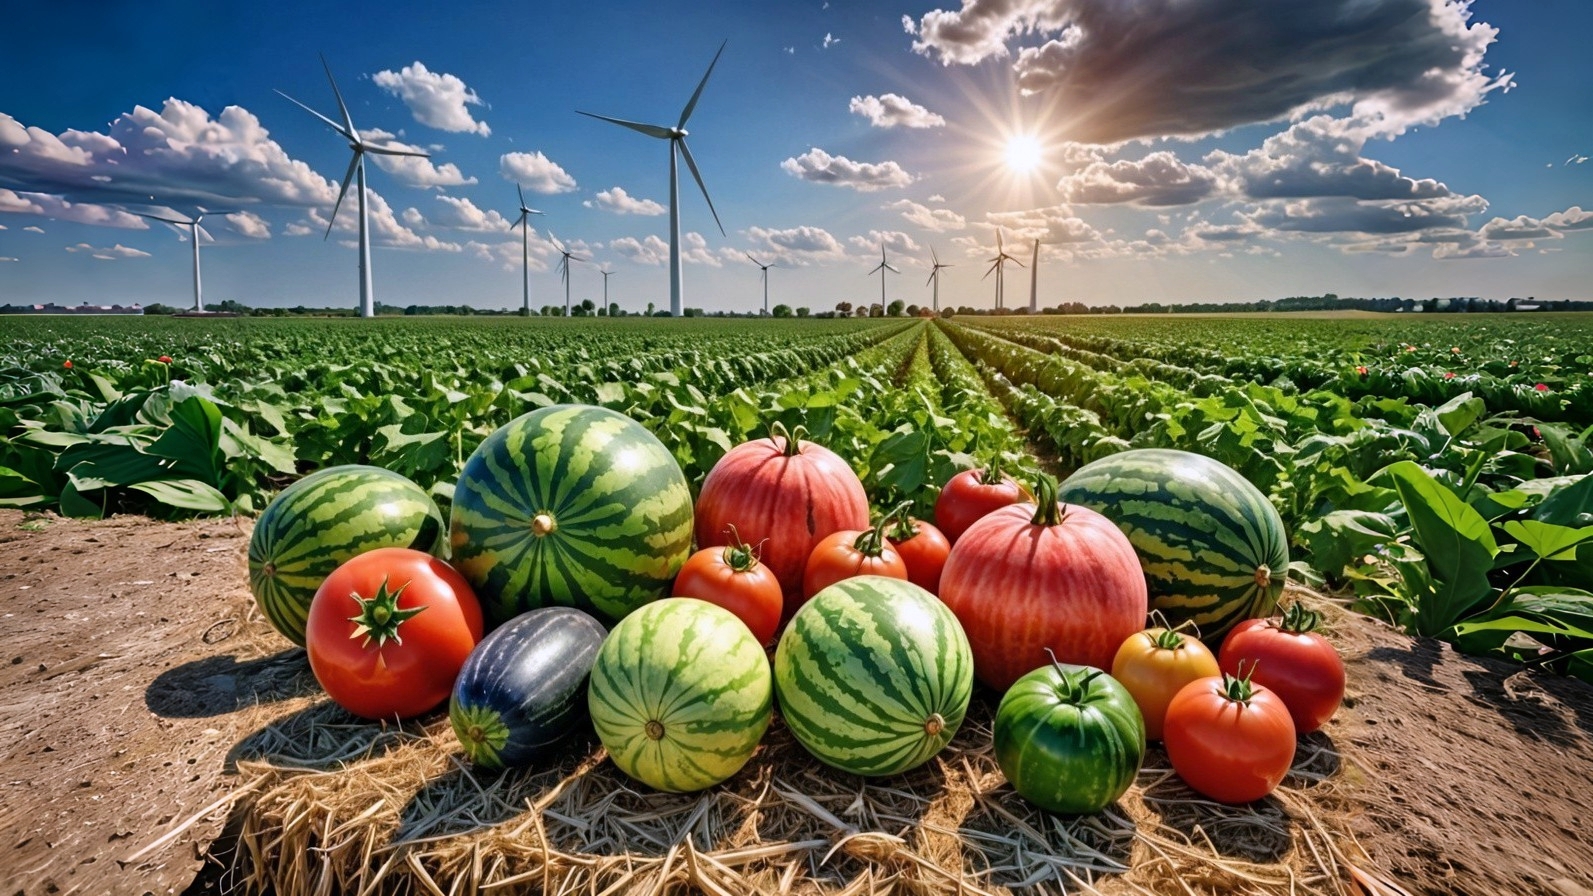 Wind turbine and agricultural vegetables